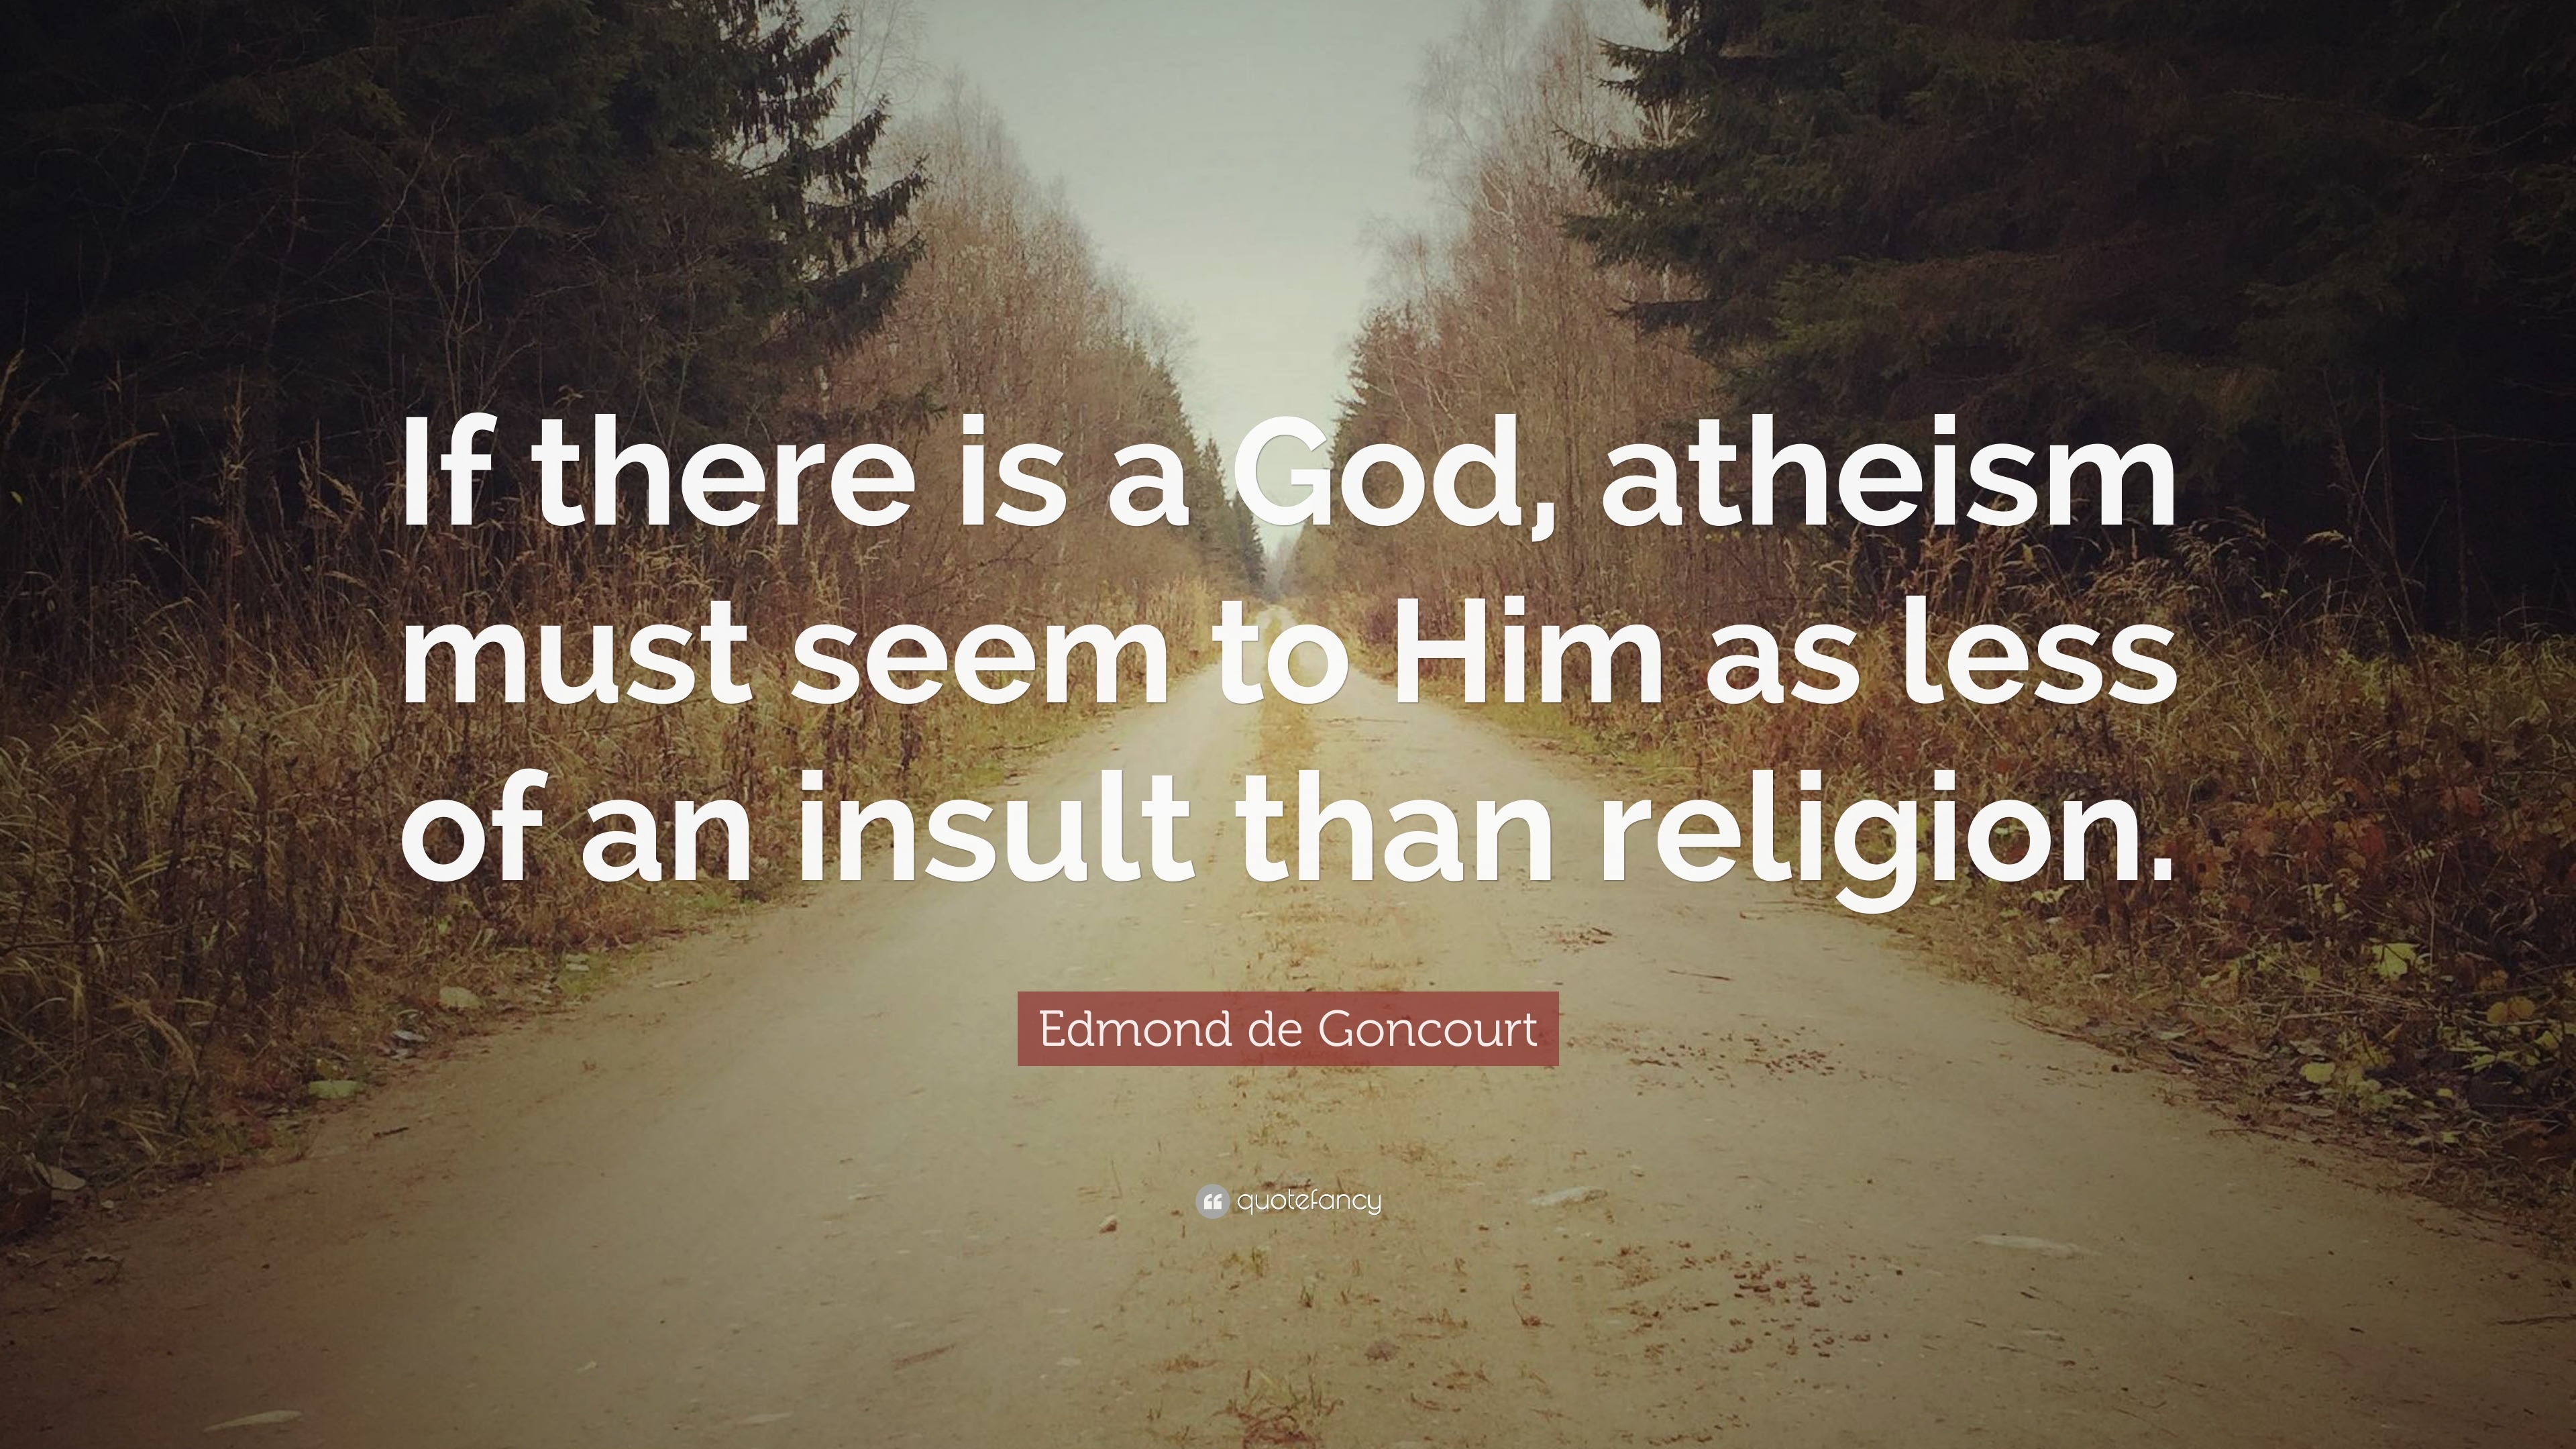 Edmond de Goncourt Quote: “If there is a God, atheism must seem to Him ...